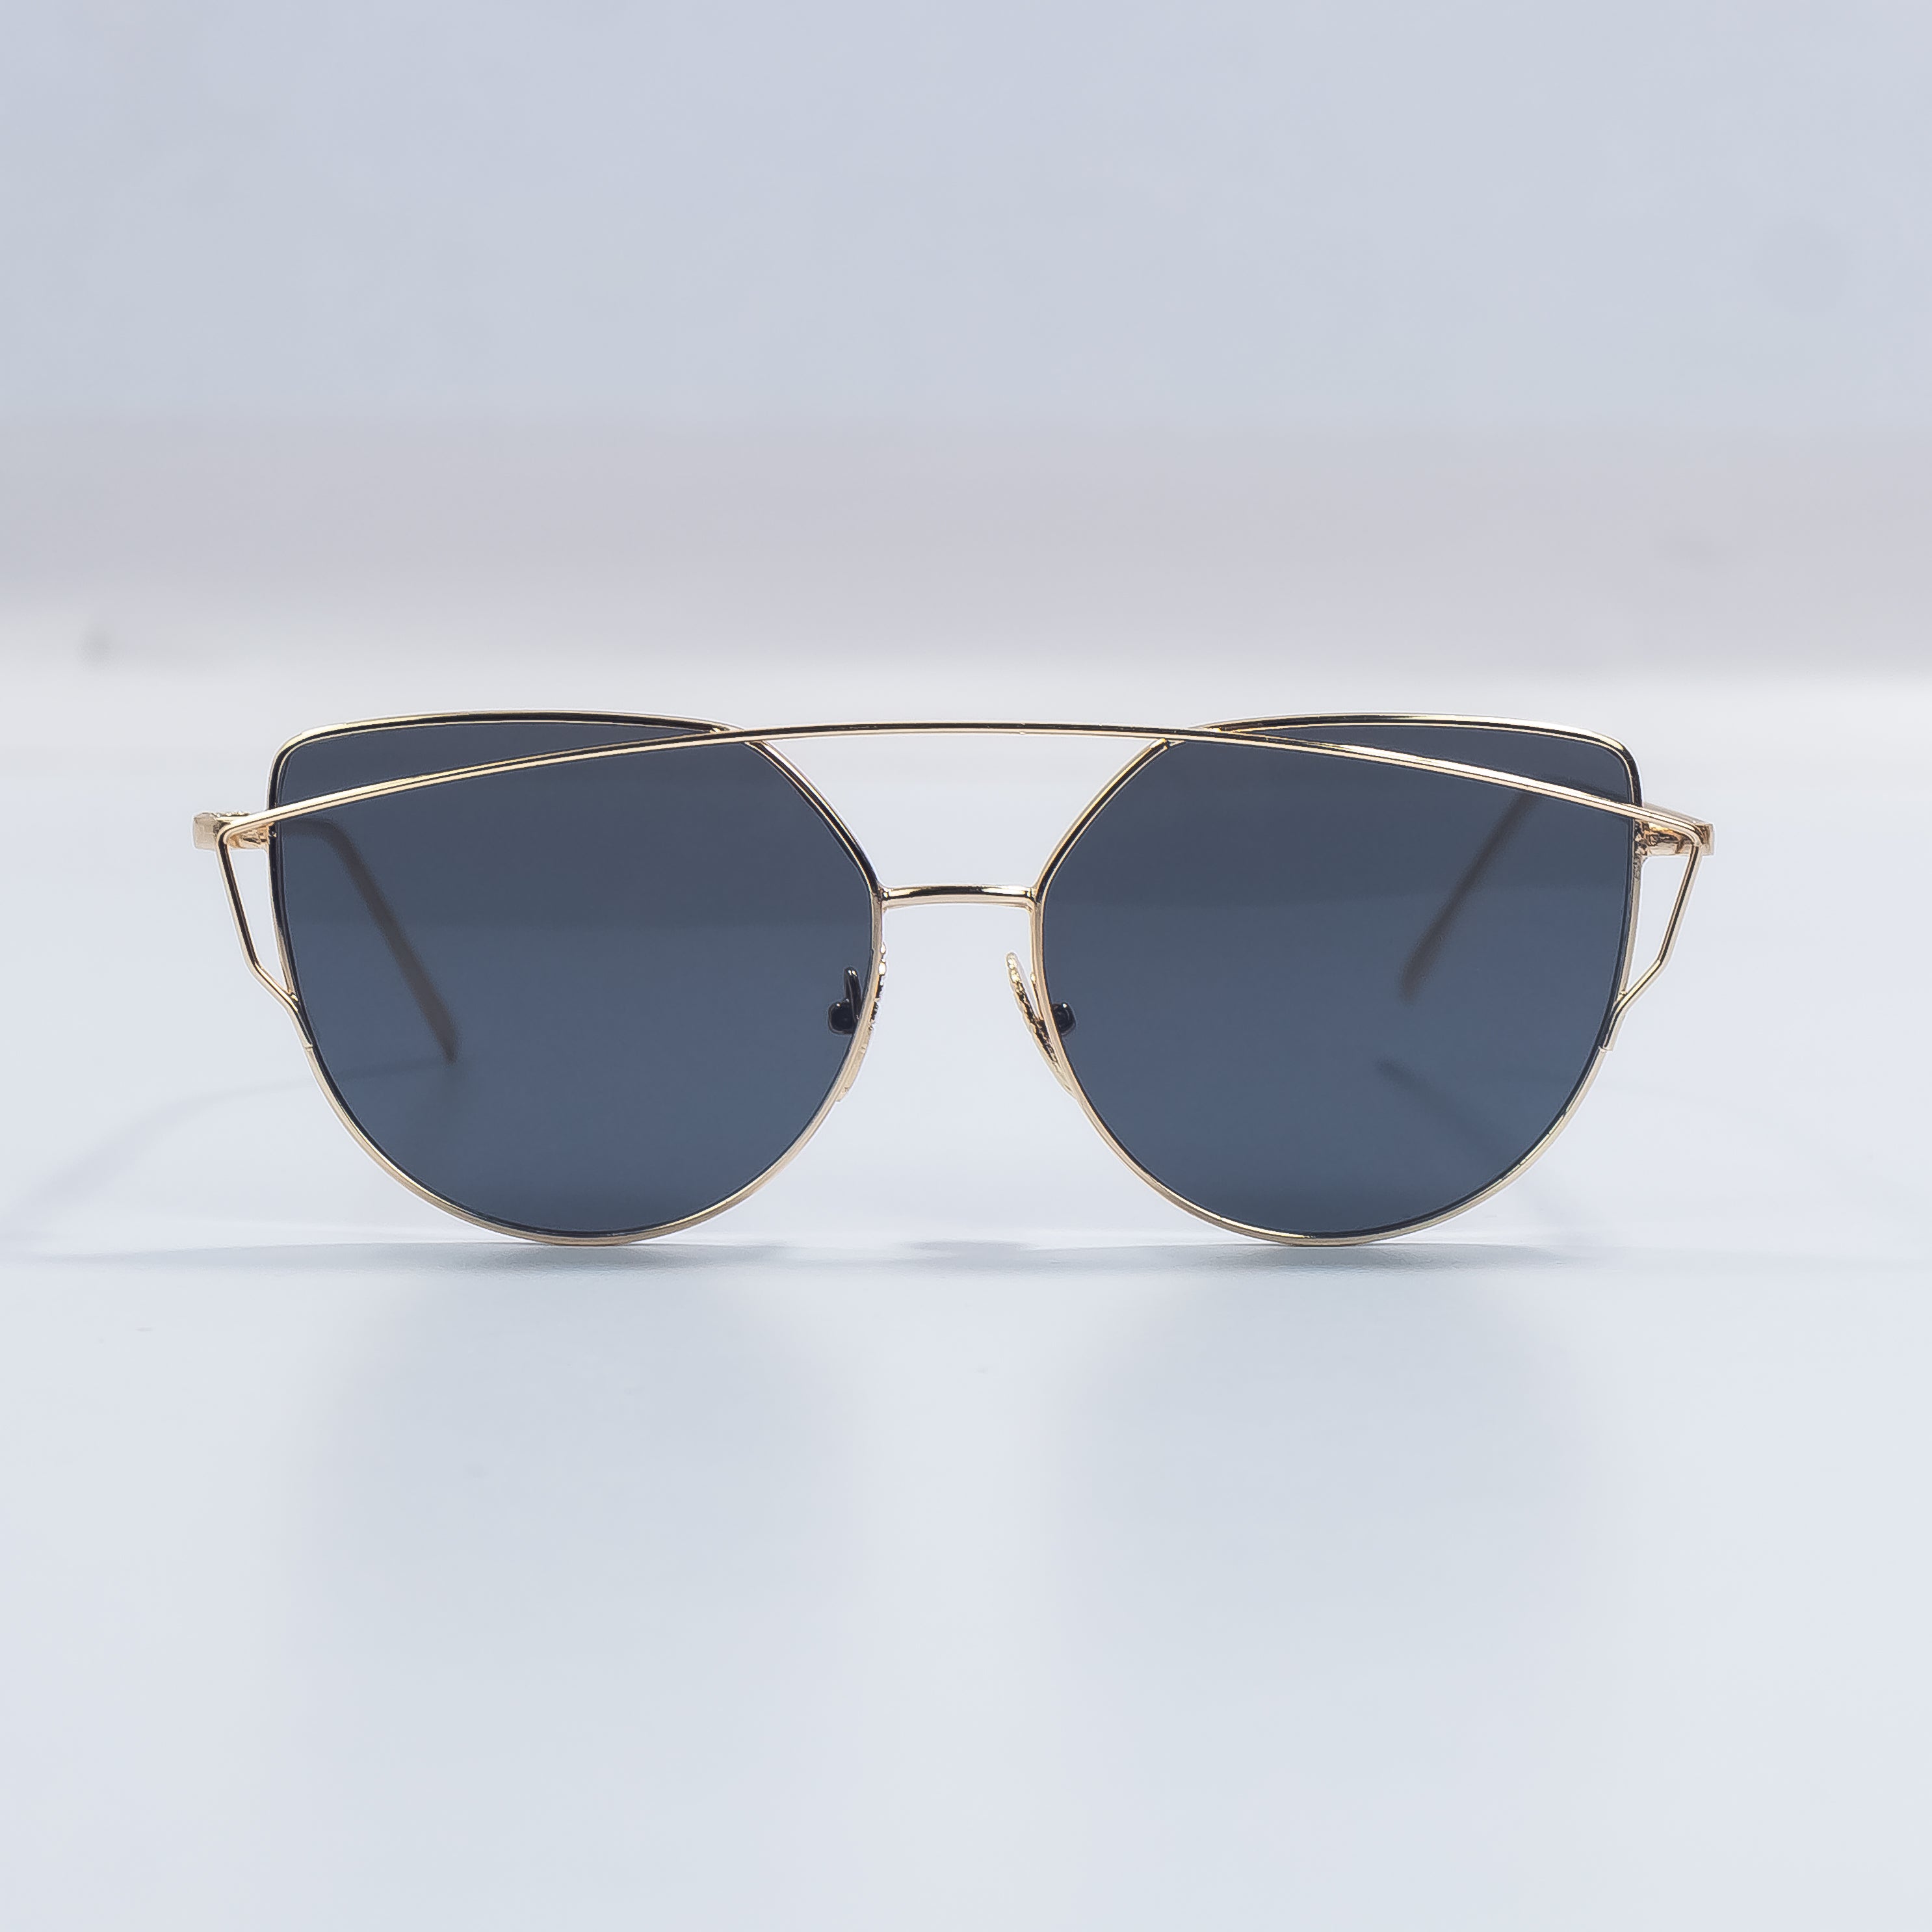 TWIN-BEAMS ROSE GOLD FRAME SUN GLASSES FOR WOMEN